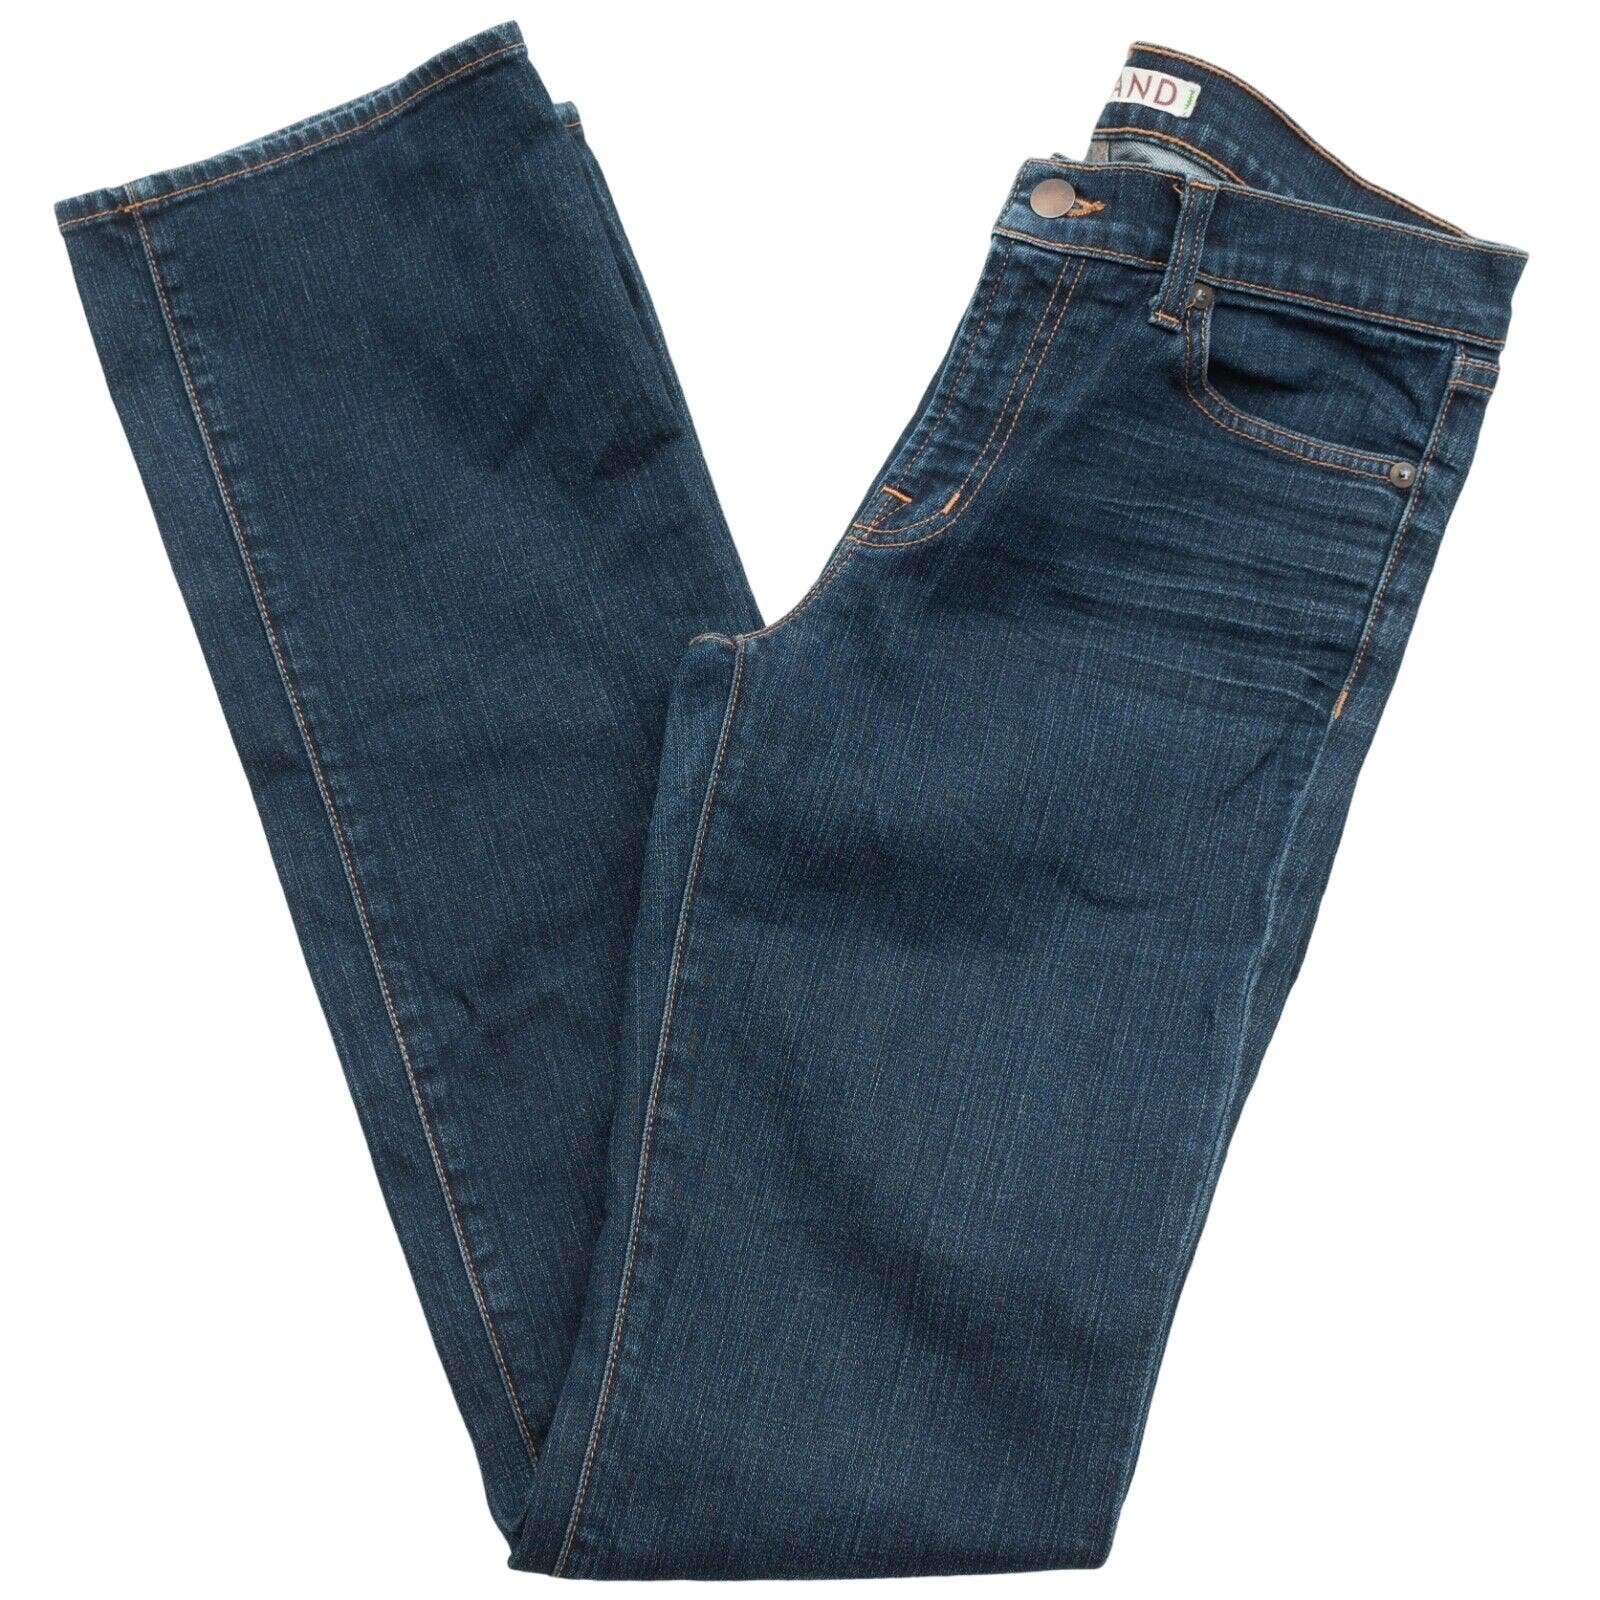 big discount J. Brand Mid-Rise Straight Leg Jeans In Ink Wash Size 28 KQ7u26jo4 Online Exclusive